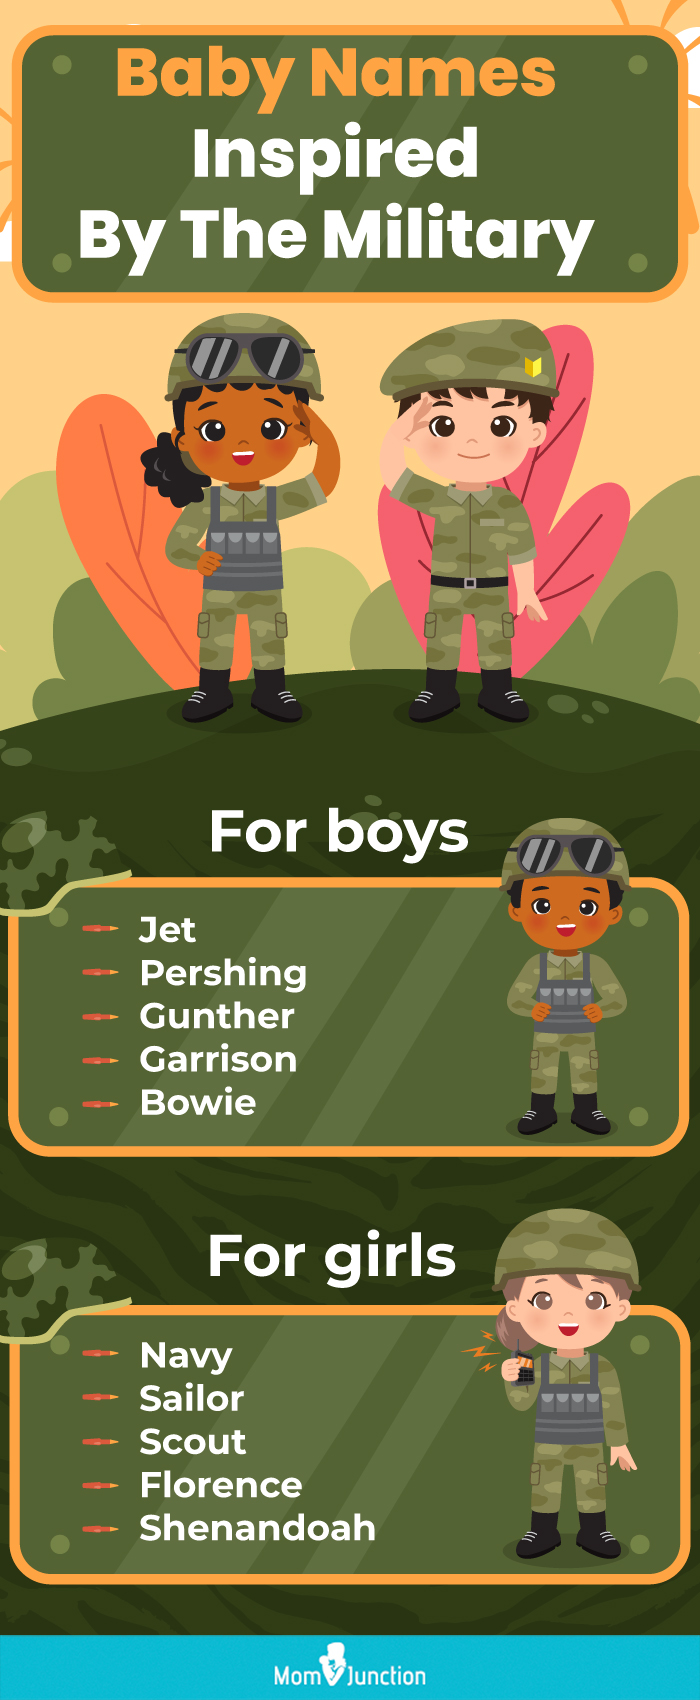 baby names inspired by the military (infographic)